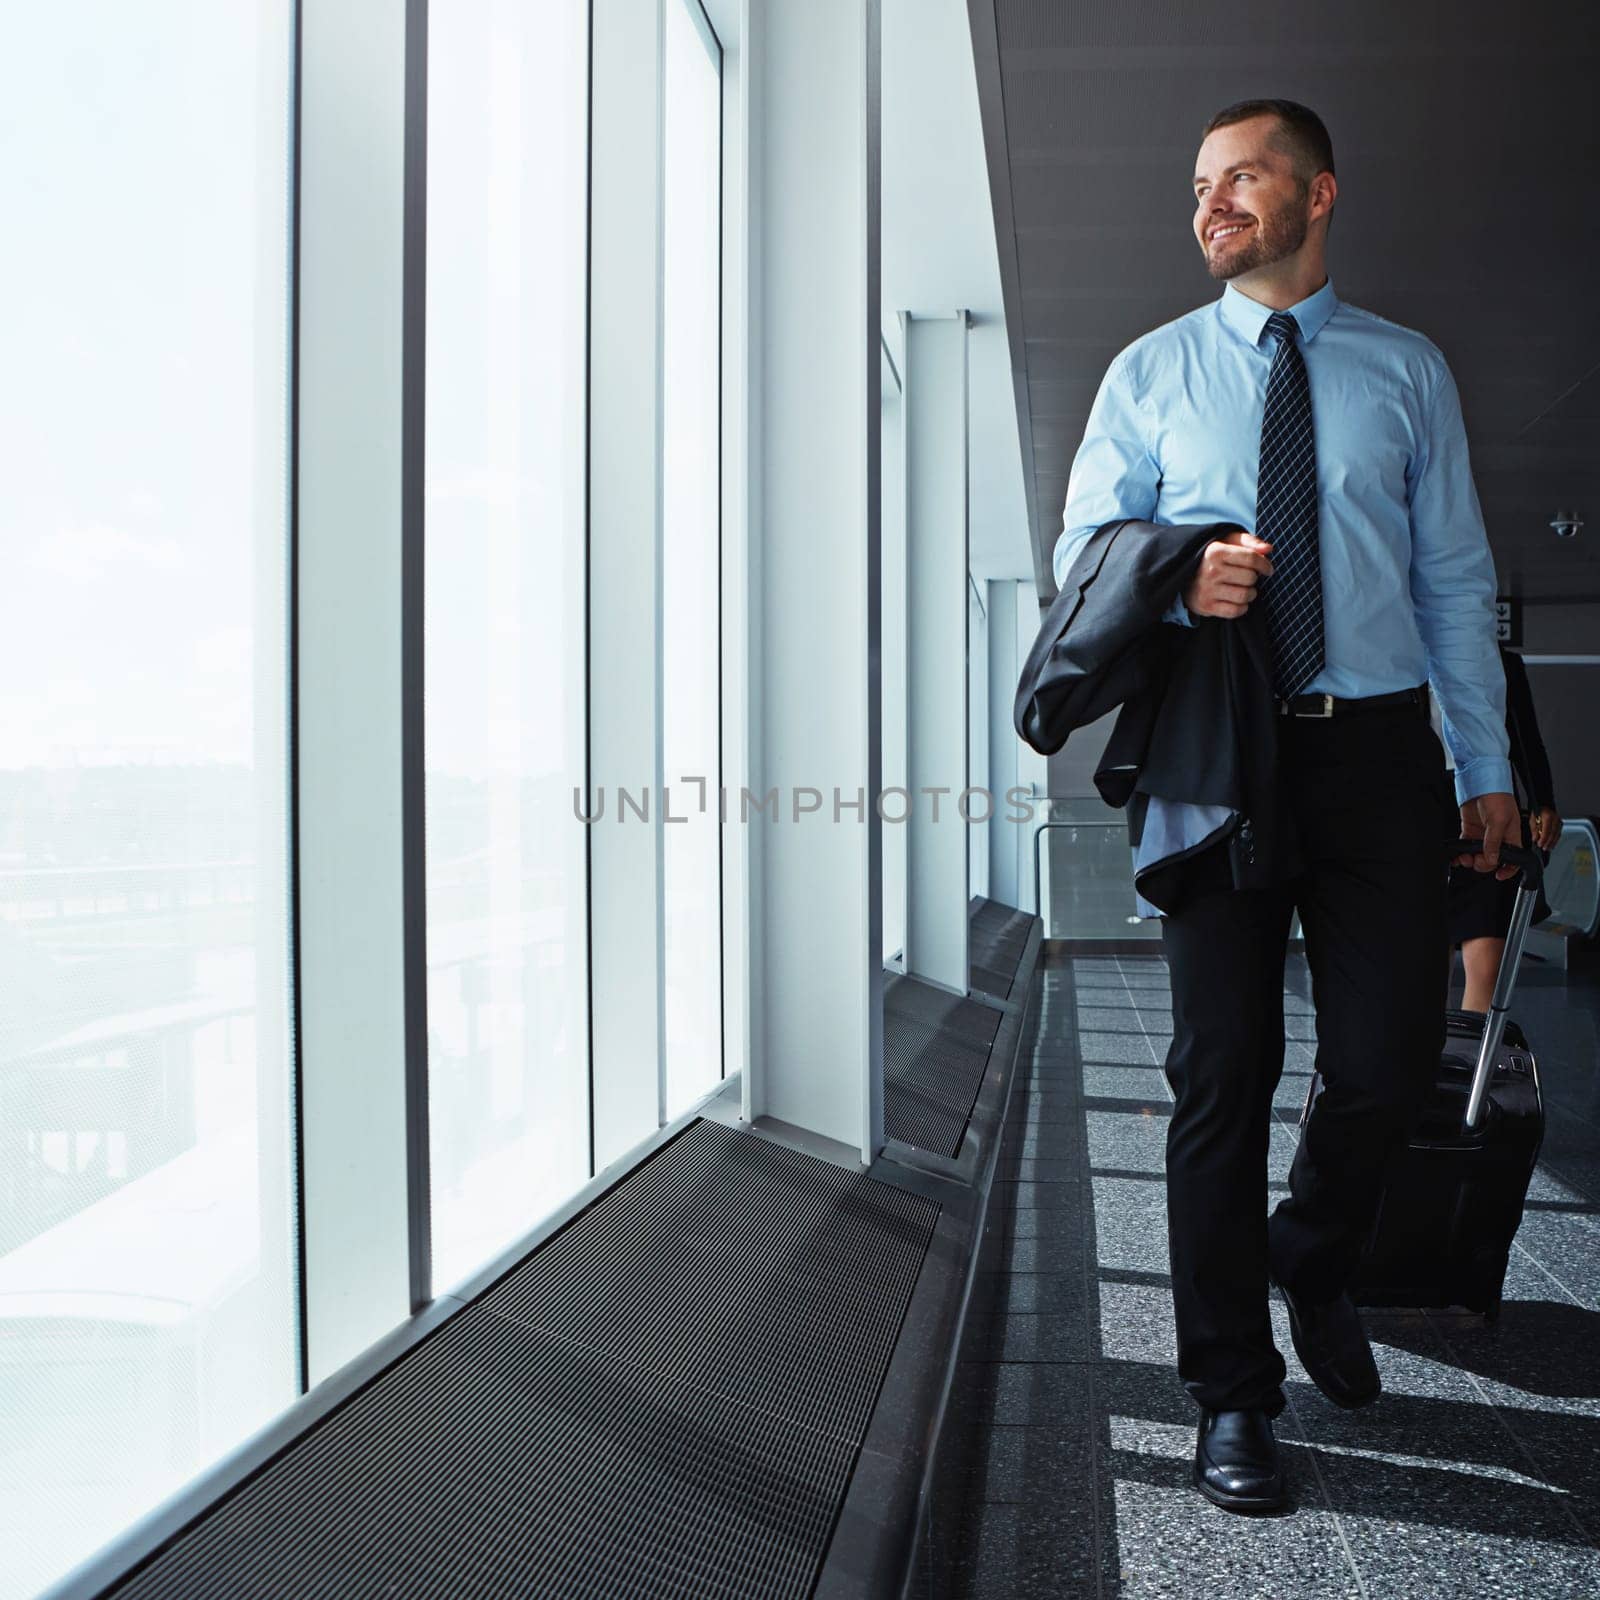 Walking, thinking or happy businessman in airport for a company trip with suitcase or luggage for commute. Smile, window or corporate workers in lobby for travel or journey on international flight by YuriArcurs